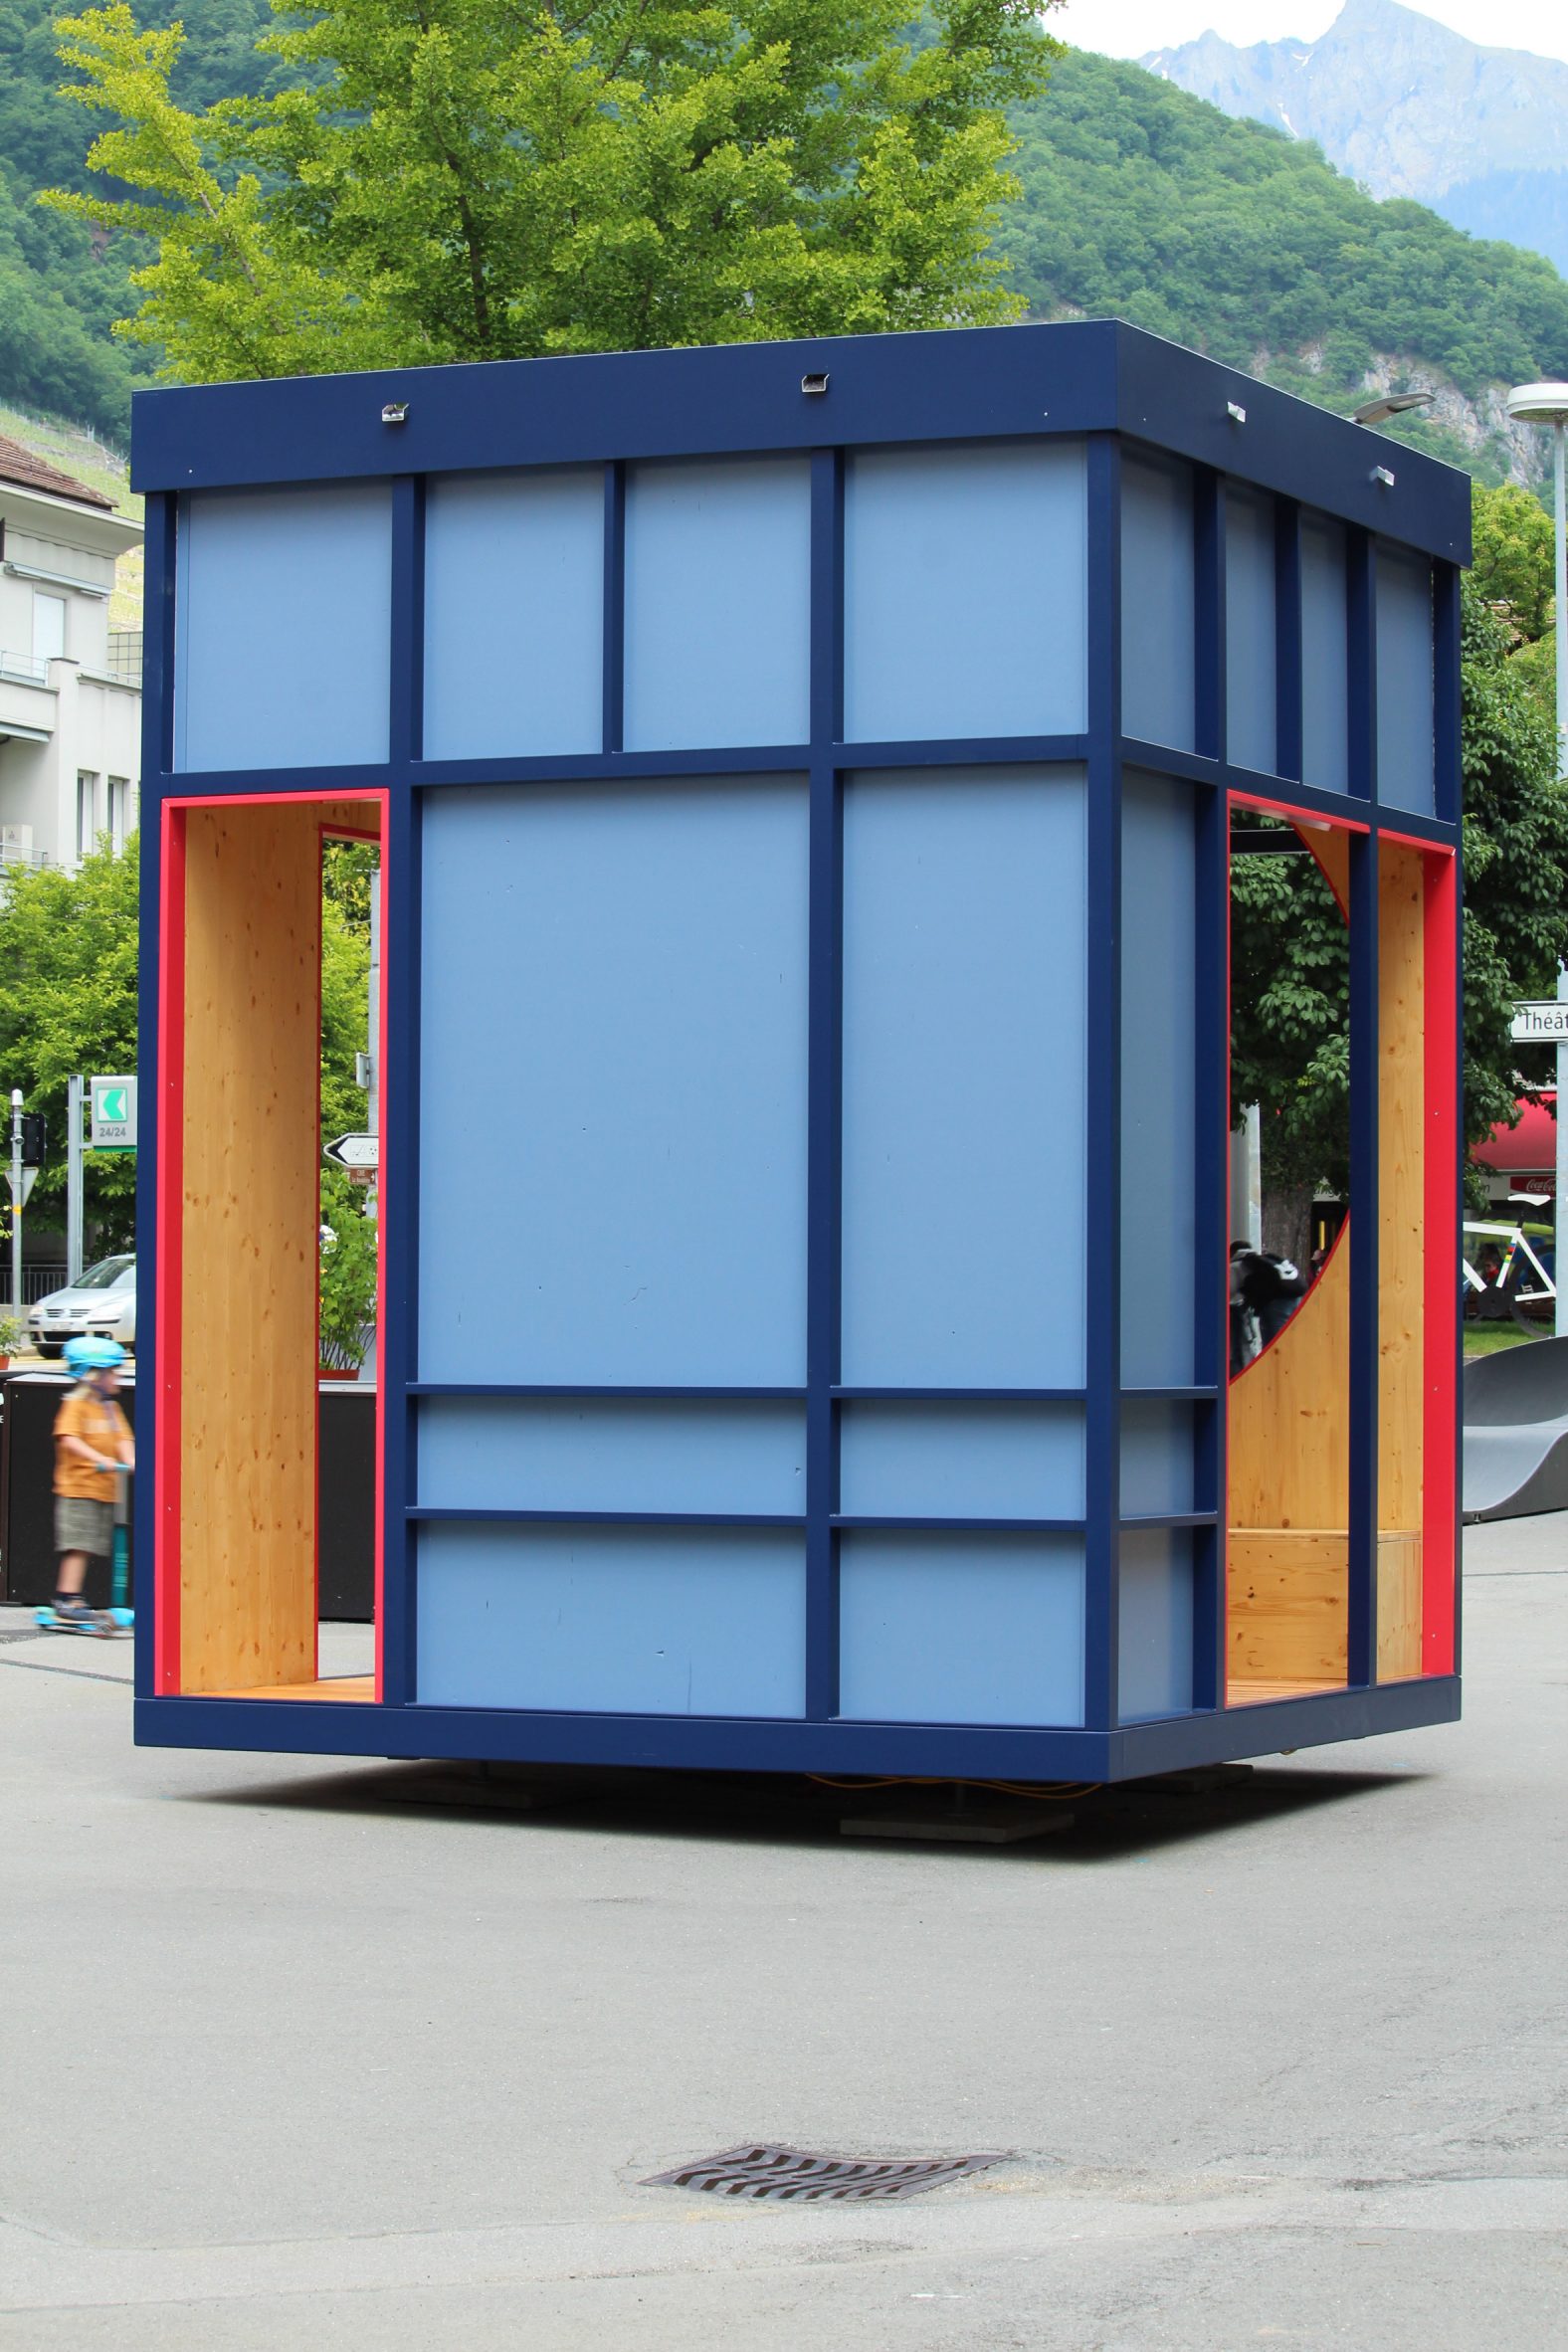 The Rotative Studio's Modular Wooden Pavilions Have Brightened The Swiss Town Square.